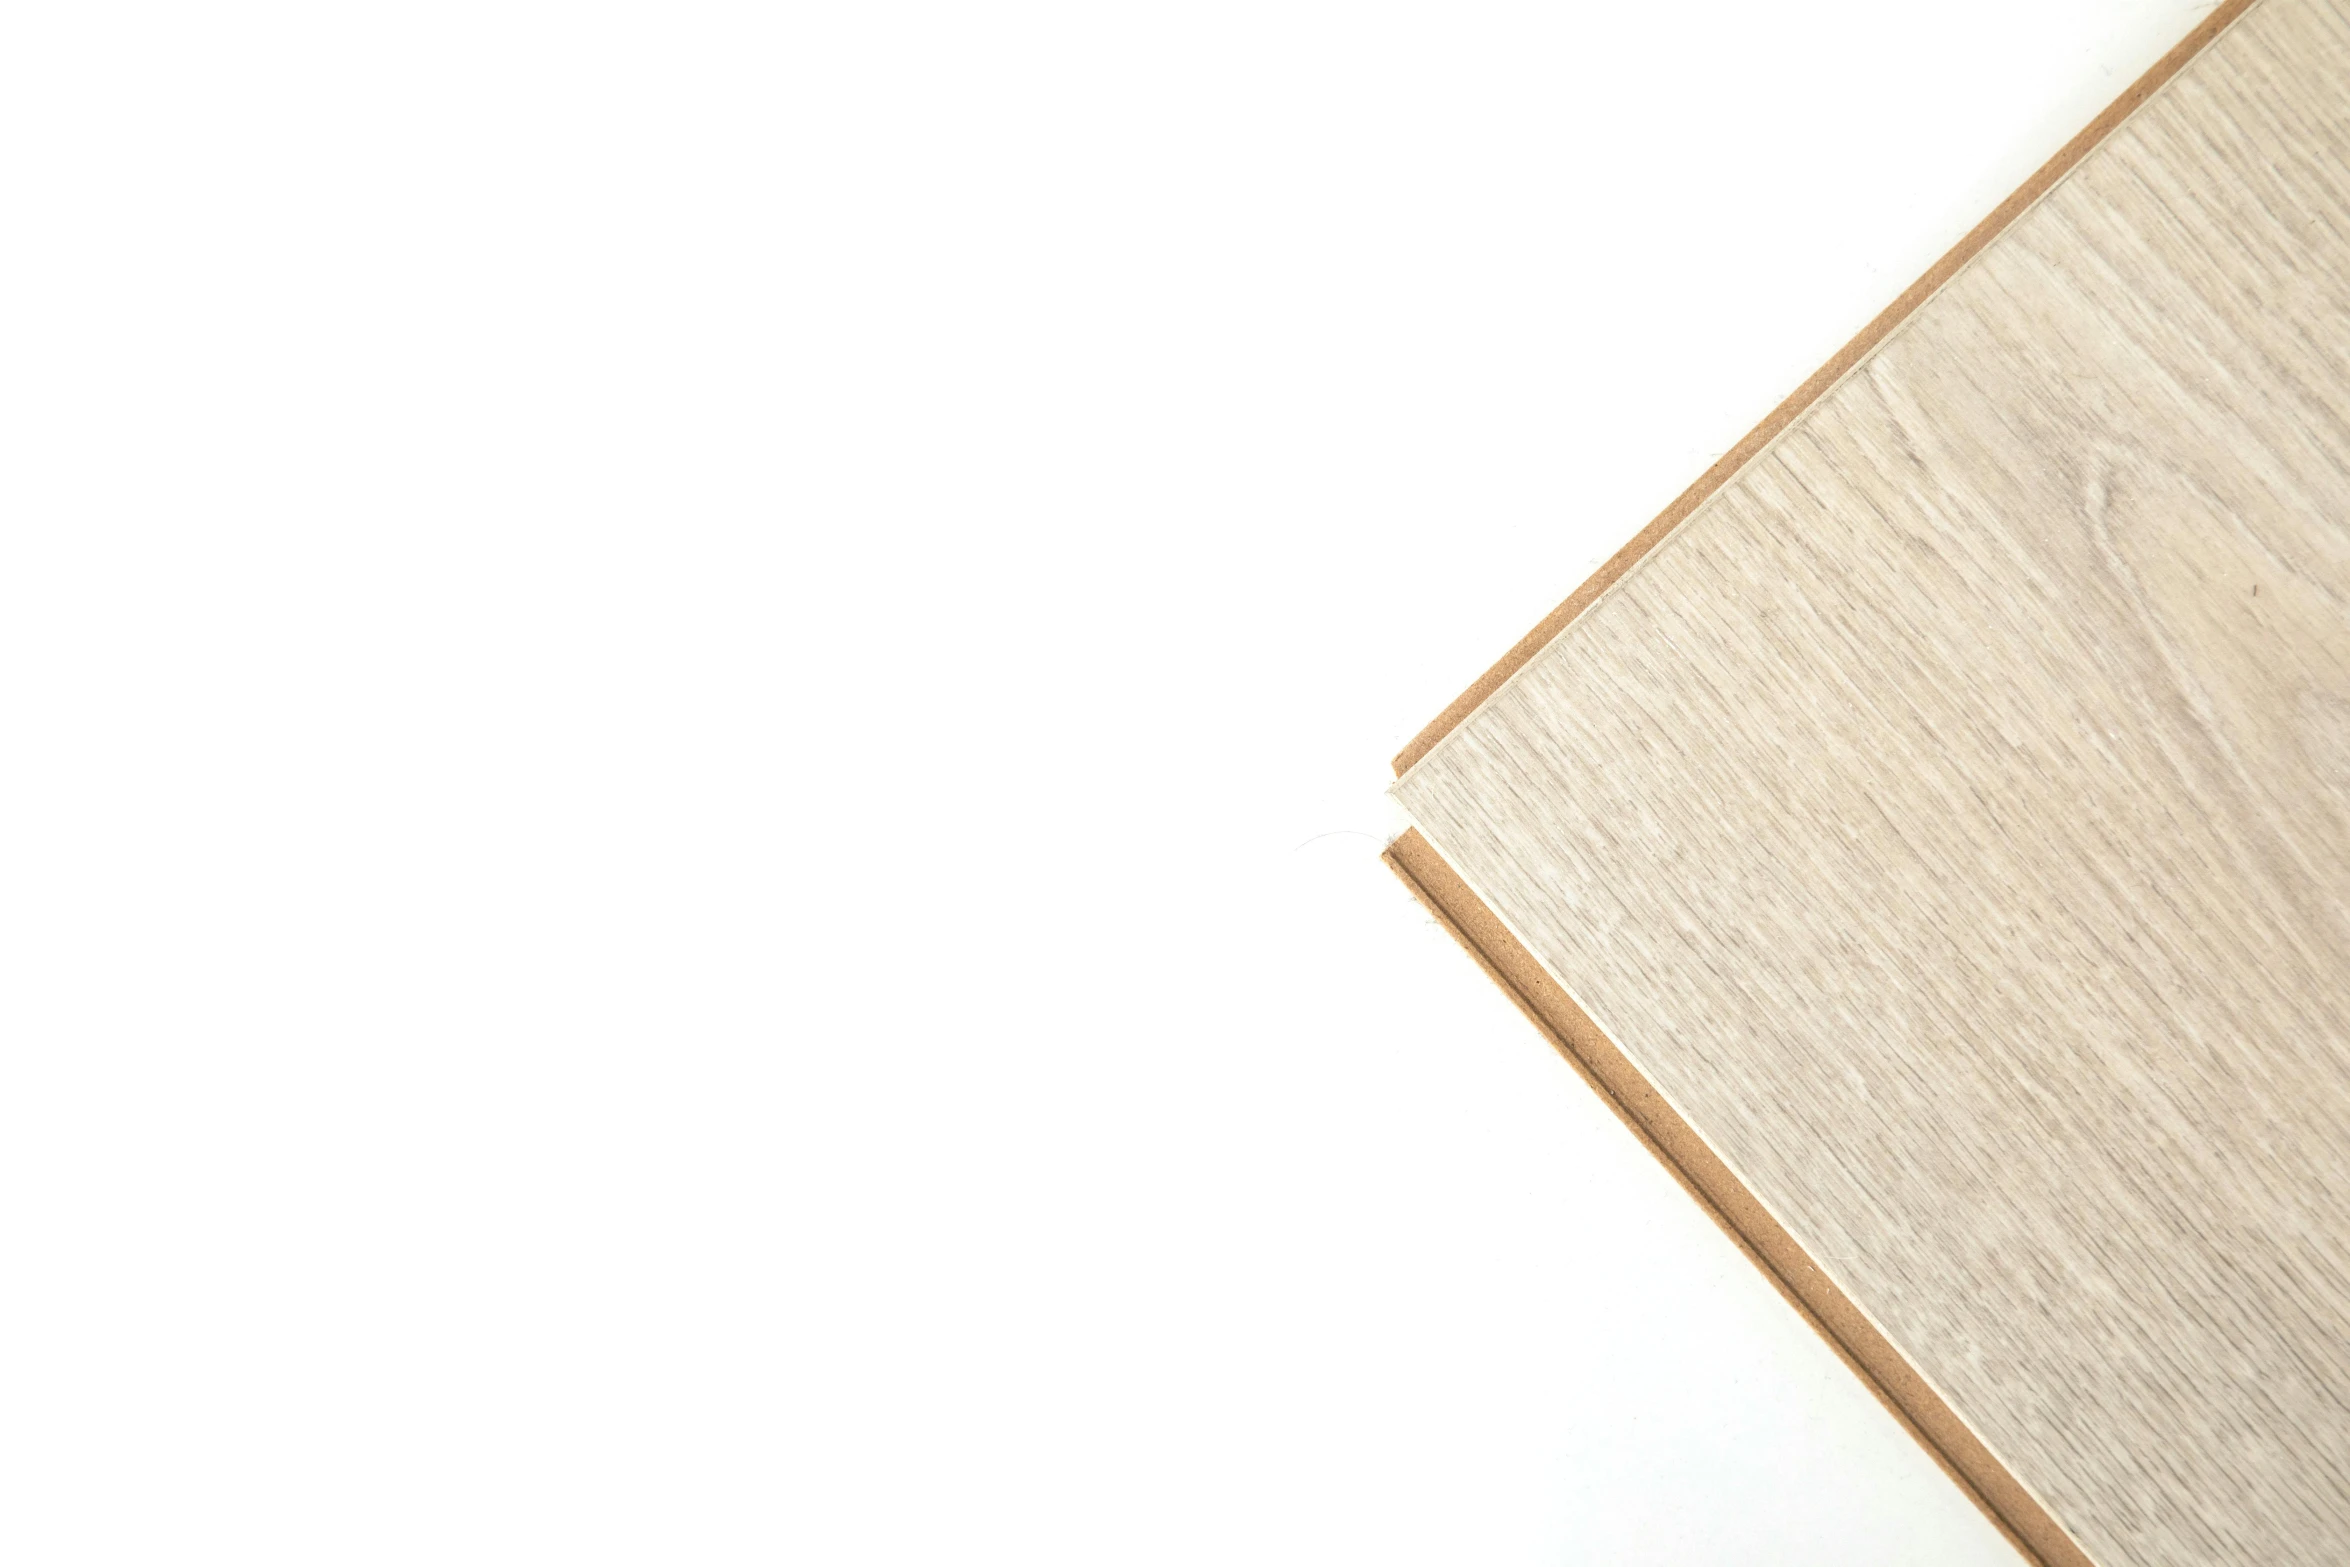 a wood grain textured board on white background